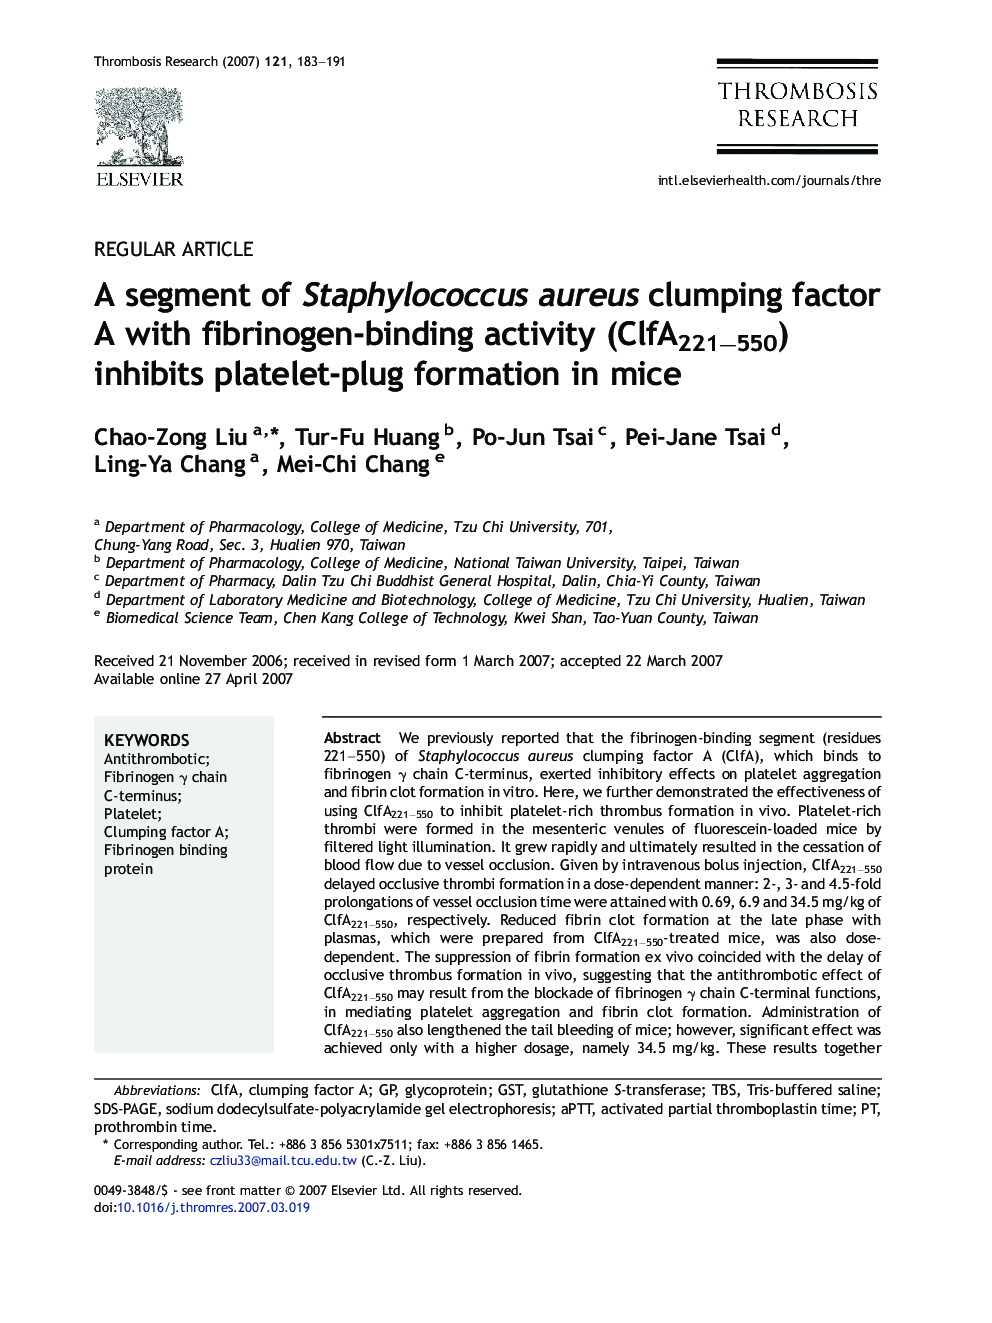 A segment of Staphylococcus aureus clumping factor A with fibrinogen-binding activity (ClfA221-550) inhibits platelet-plug formation in mice